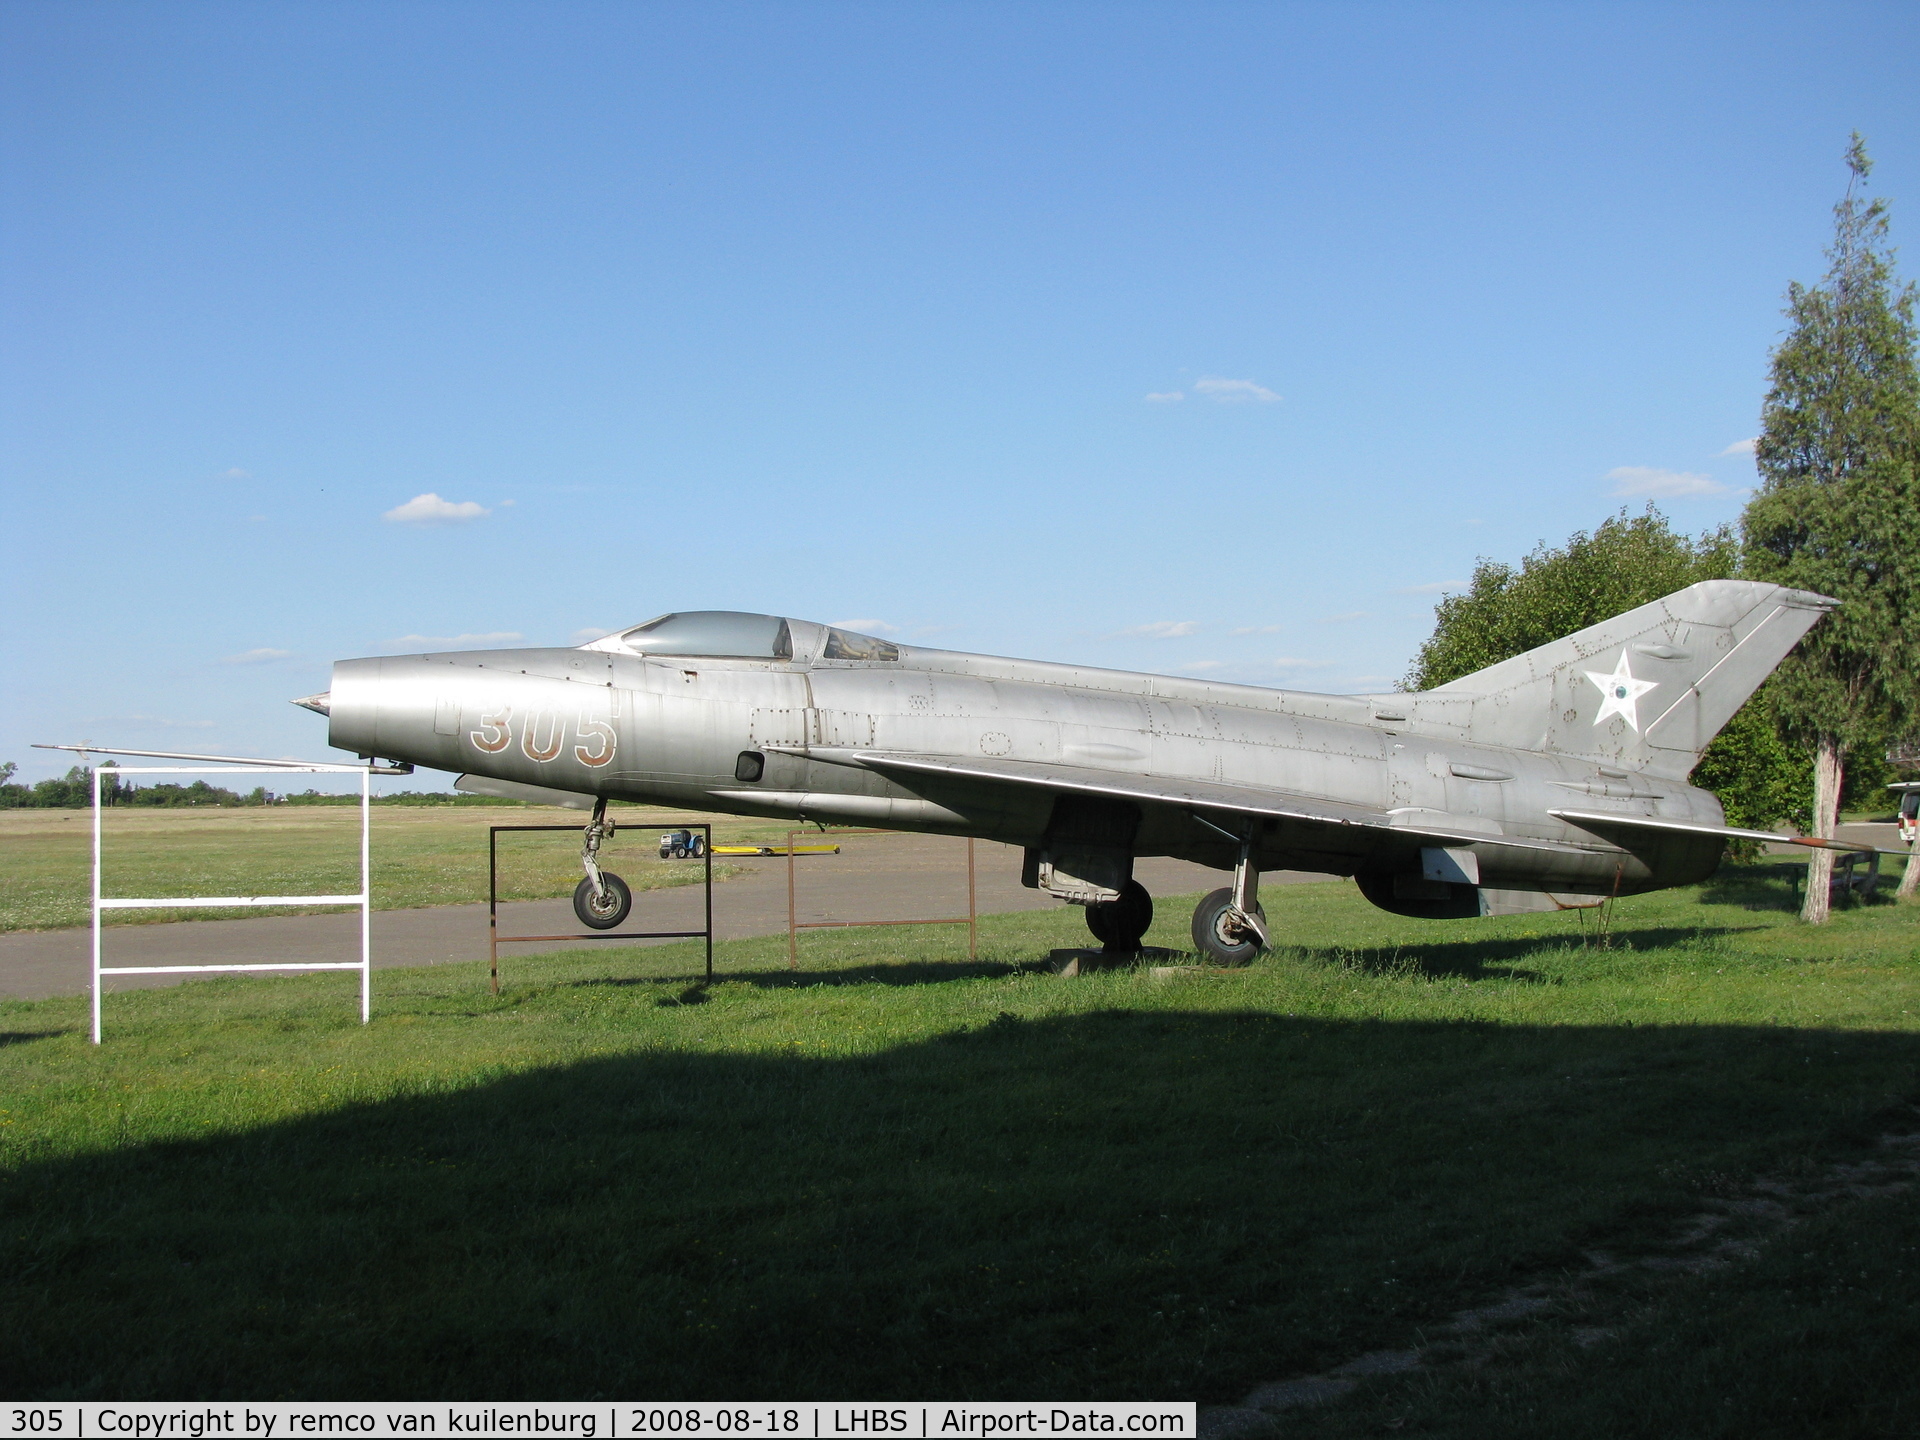 305, Mikoyan-Gurevich MiG-21F-13 C/N 741305, for many years preserved on Budaors